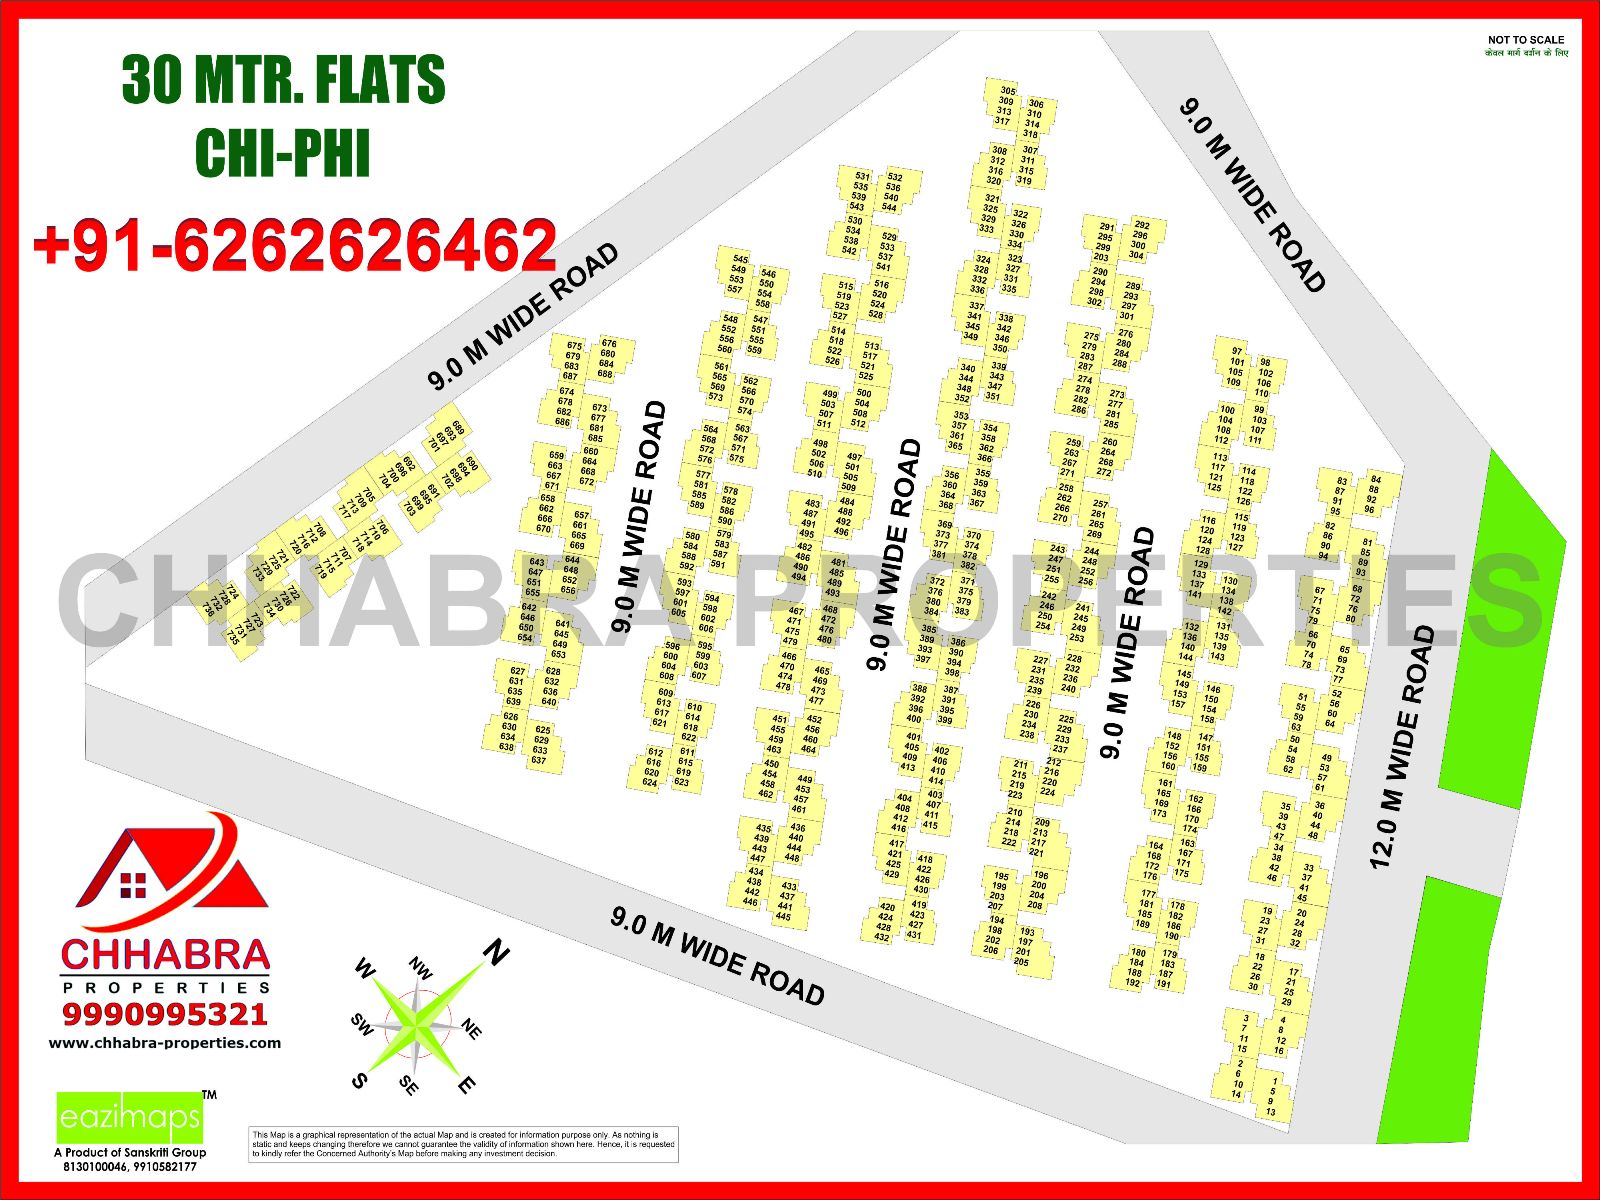 layout plan for 30mtr flats chi phi map